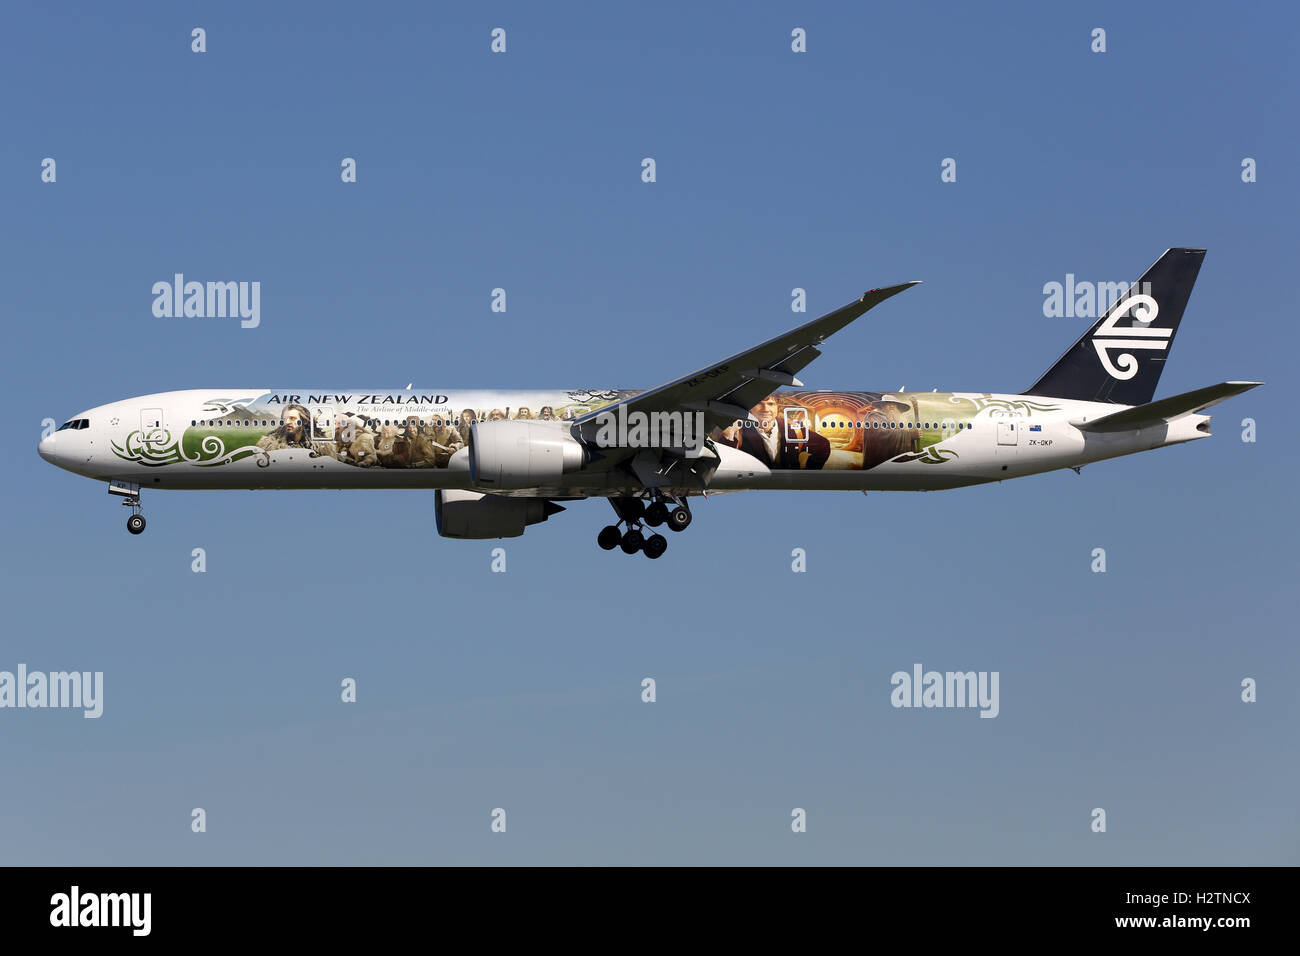 Los Angeles, USA - February 21, 2016: An Air New Zealand Boeing 777-300ER with the special livery The Hobbit and the registratio Stock Photo